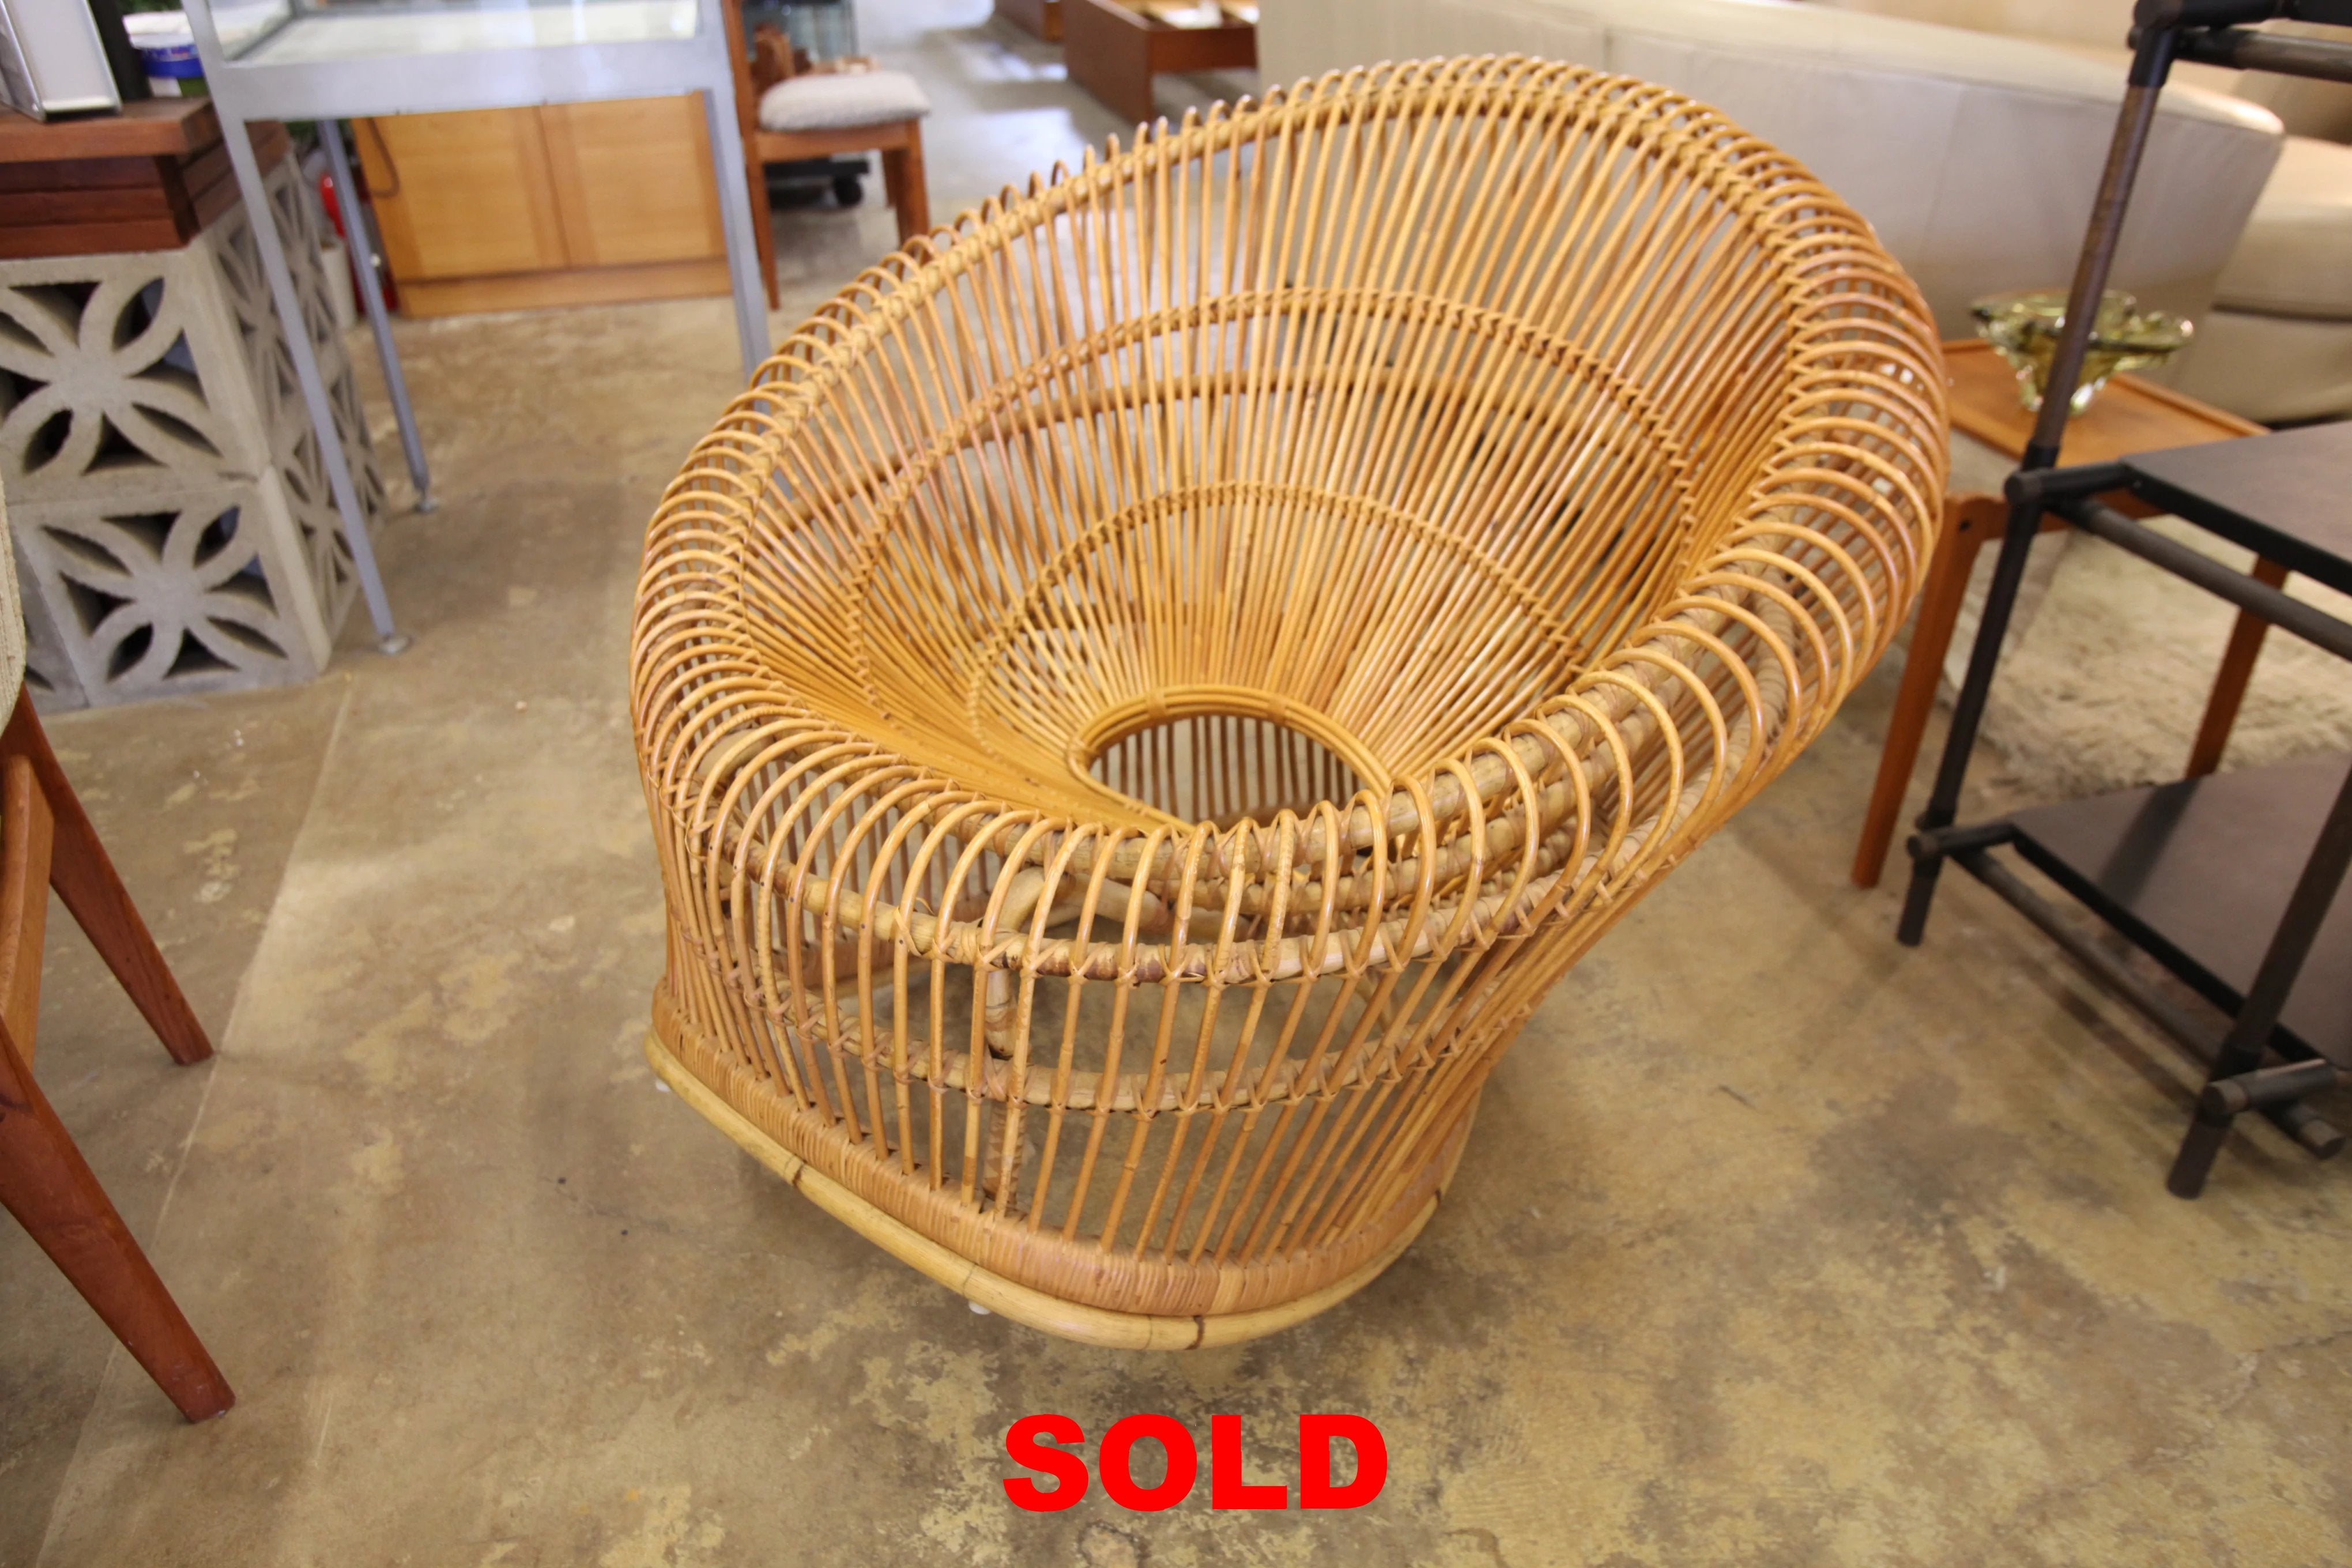 Unique Vintage Circular Wicker Chair Likely by Franco Albini (41"W x 41"D x 32.75"H)